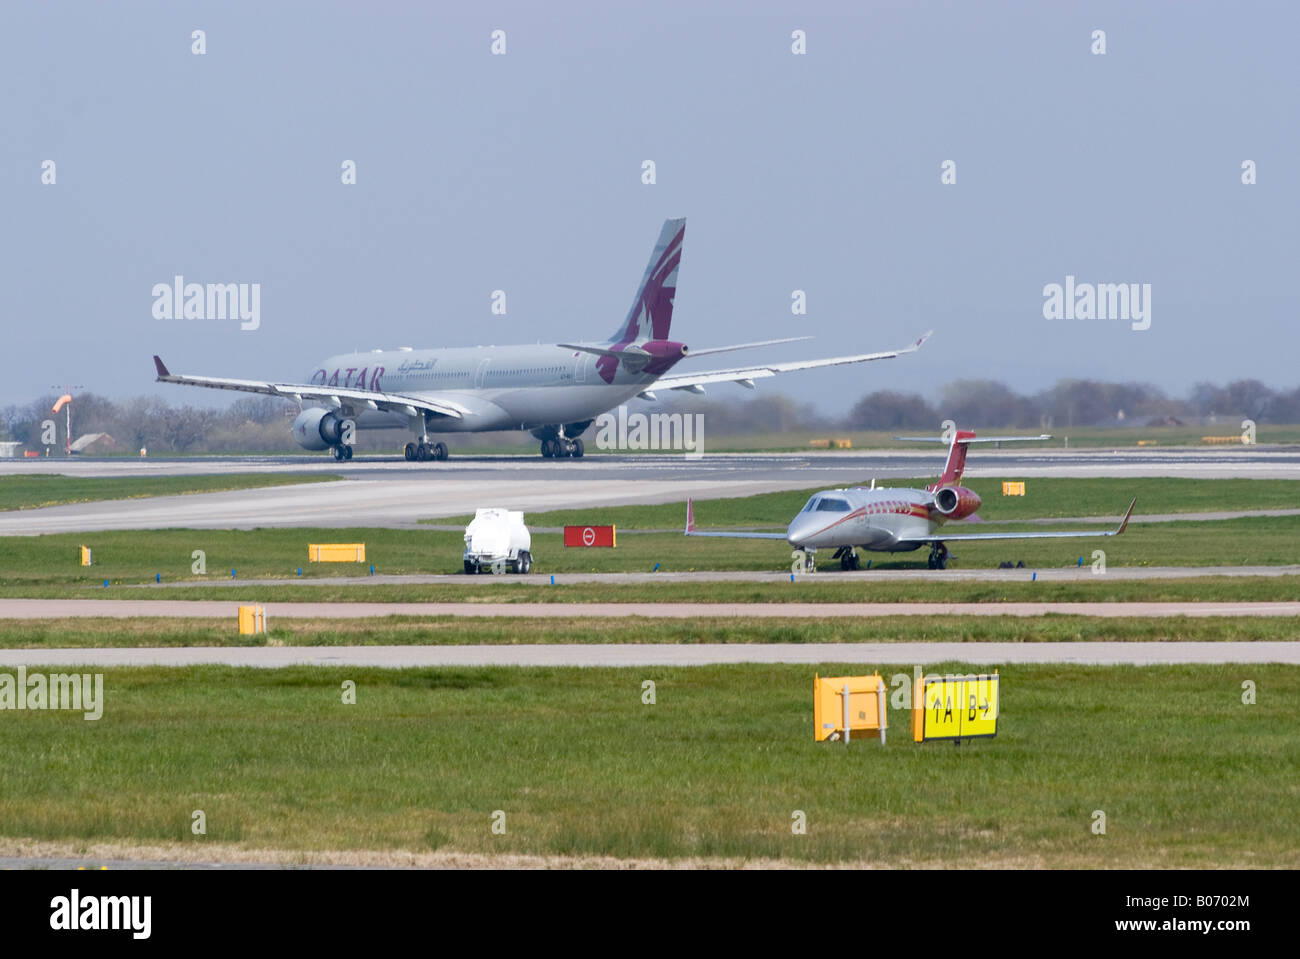 Qatar Airways Airbus A330 [A330-302] Taking-off from Runway 05 at Manchester Ringway Airport England United Kingdom Stock Photo